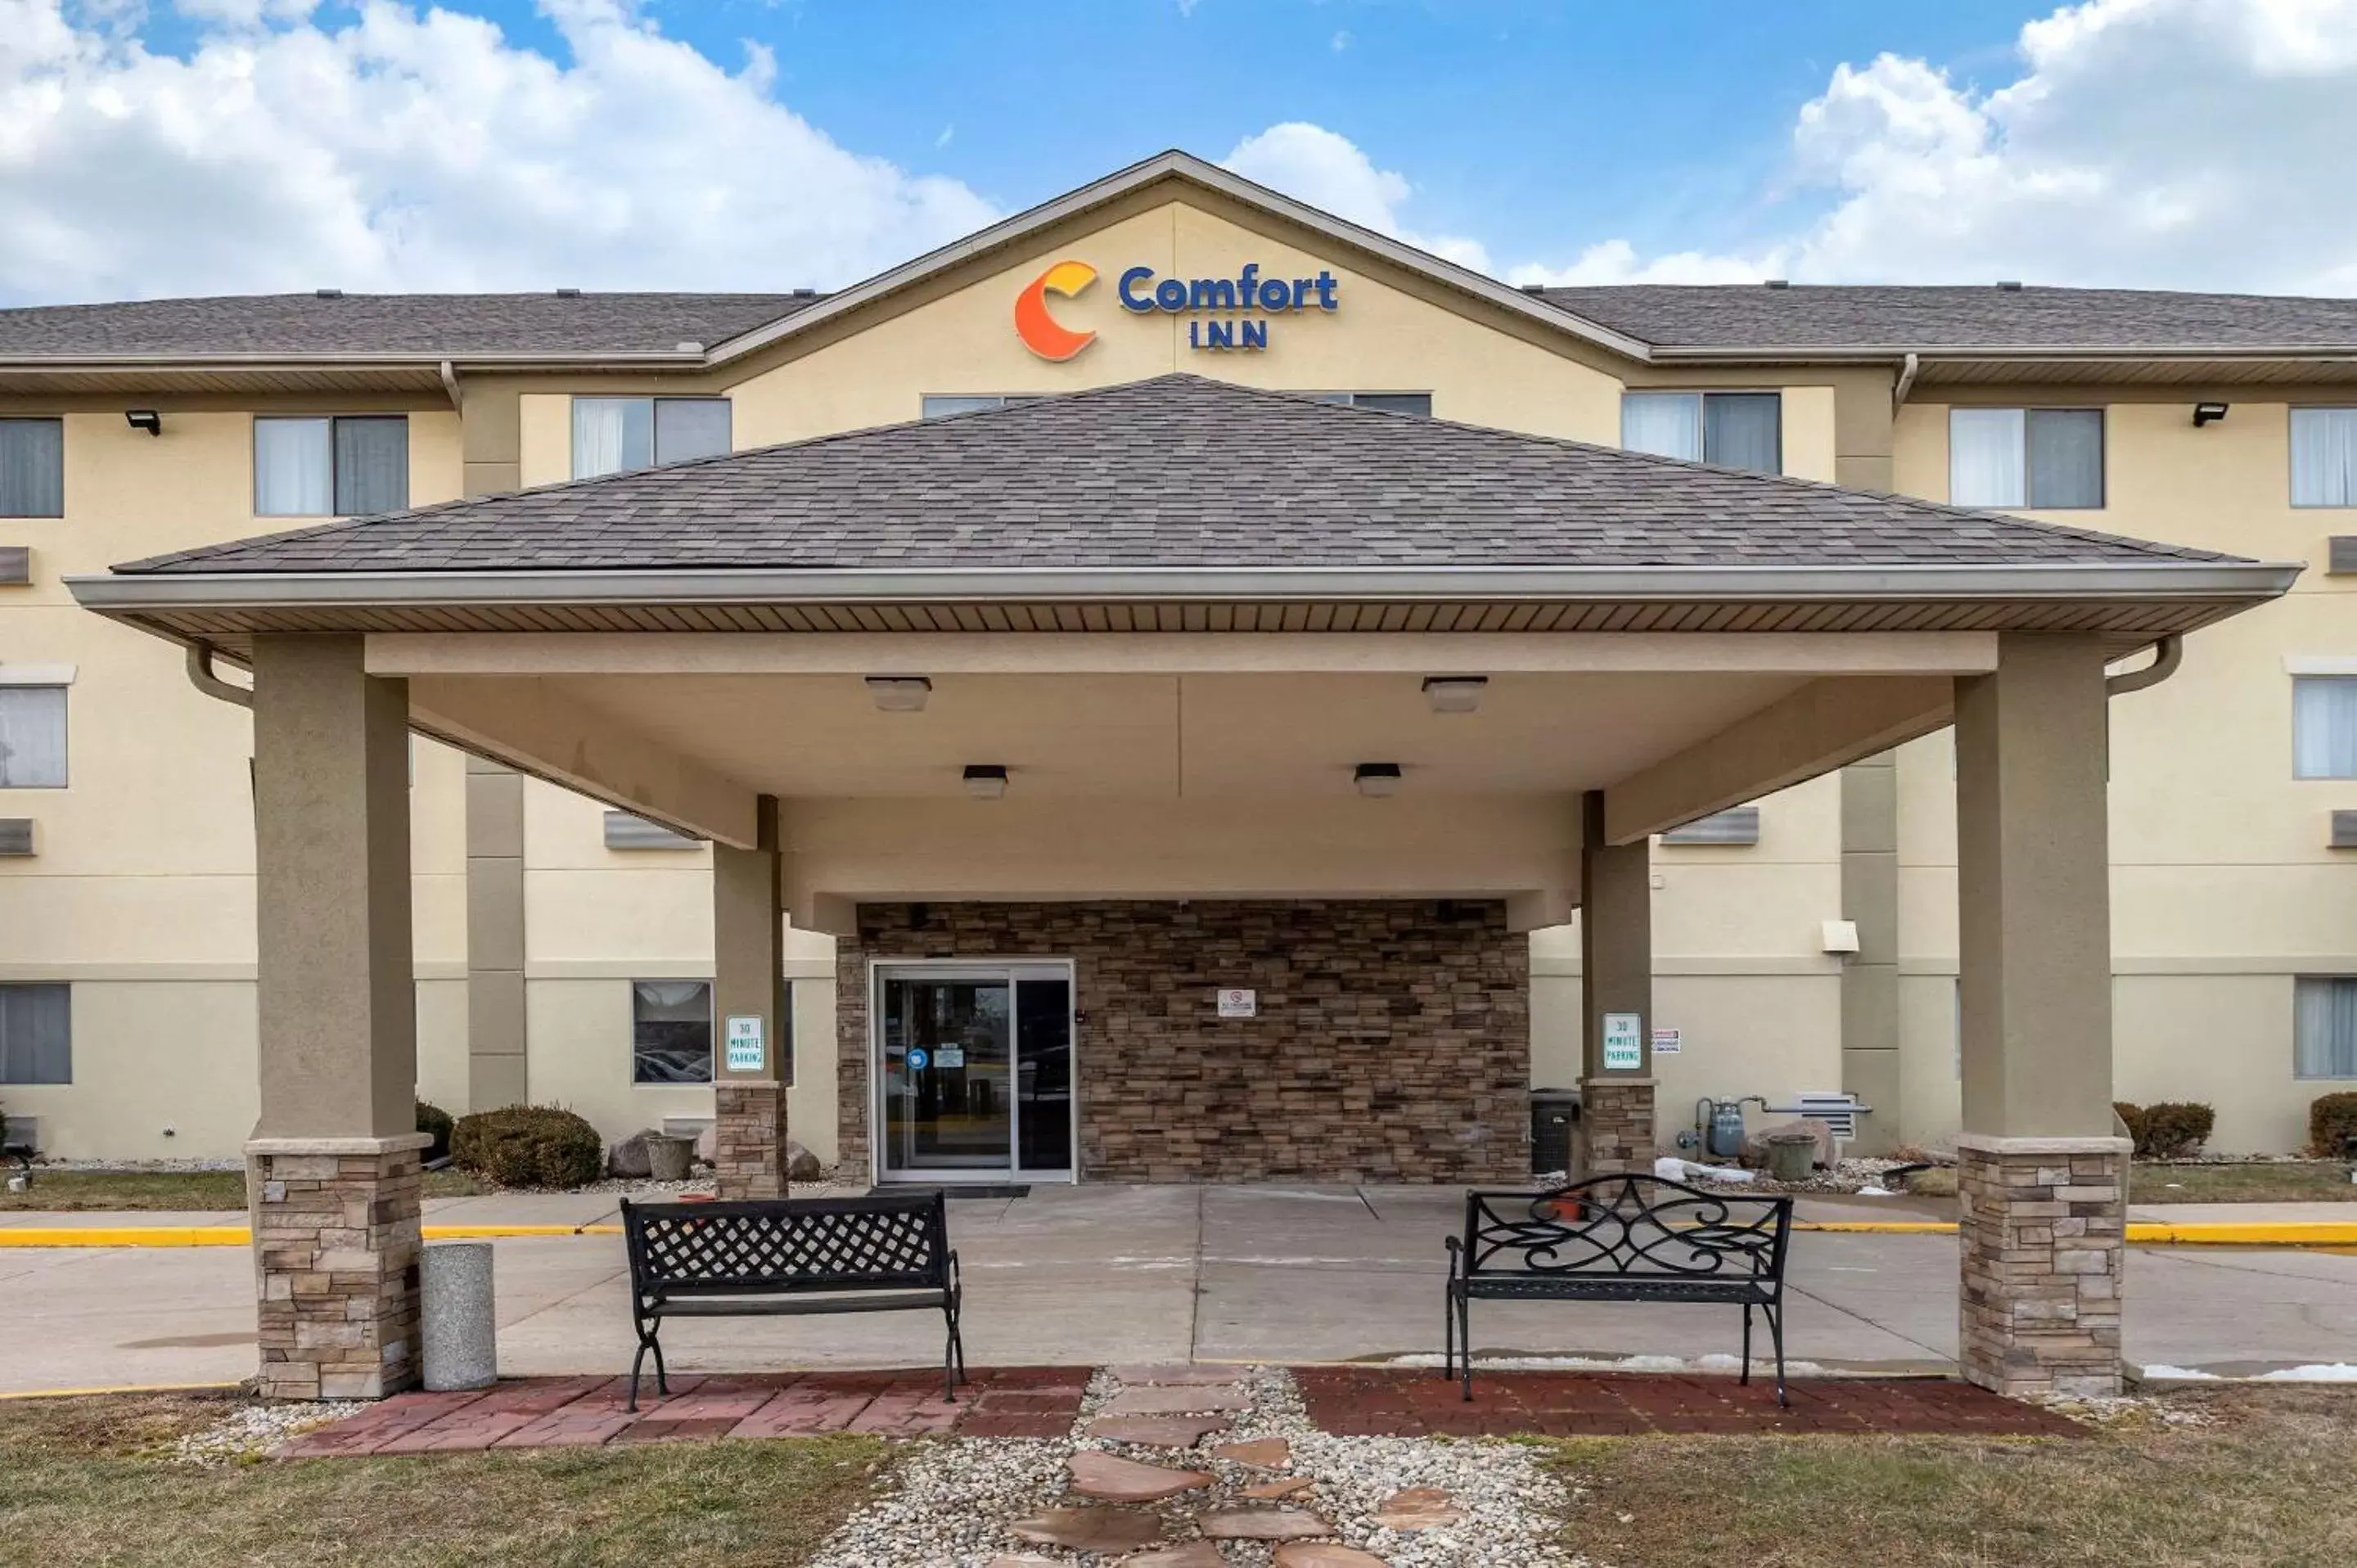 Property building in Comfort Inn Shelbyville North